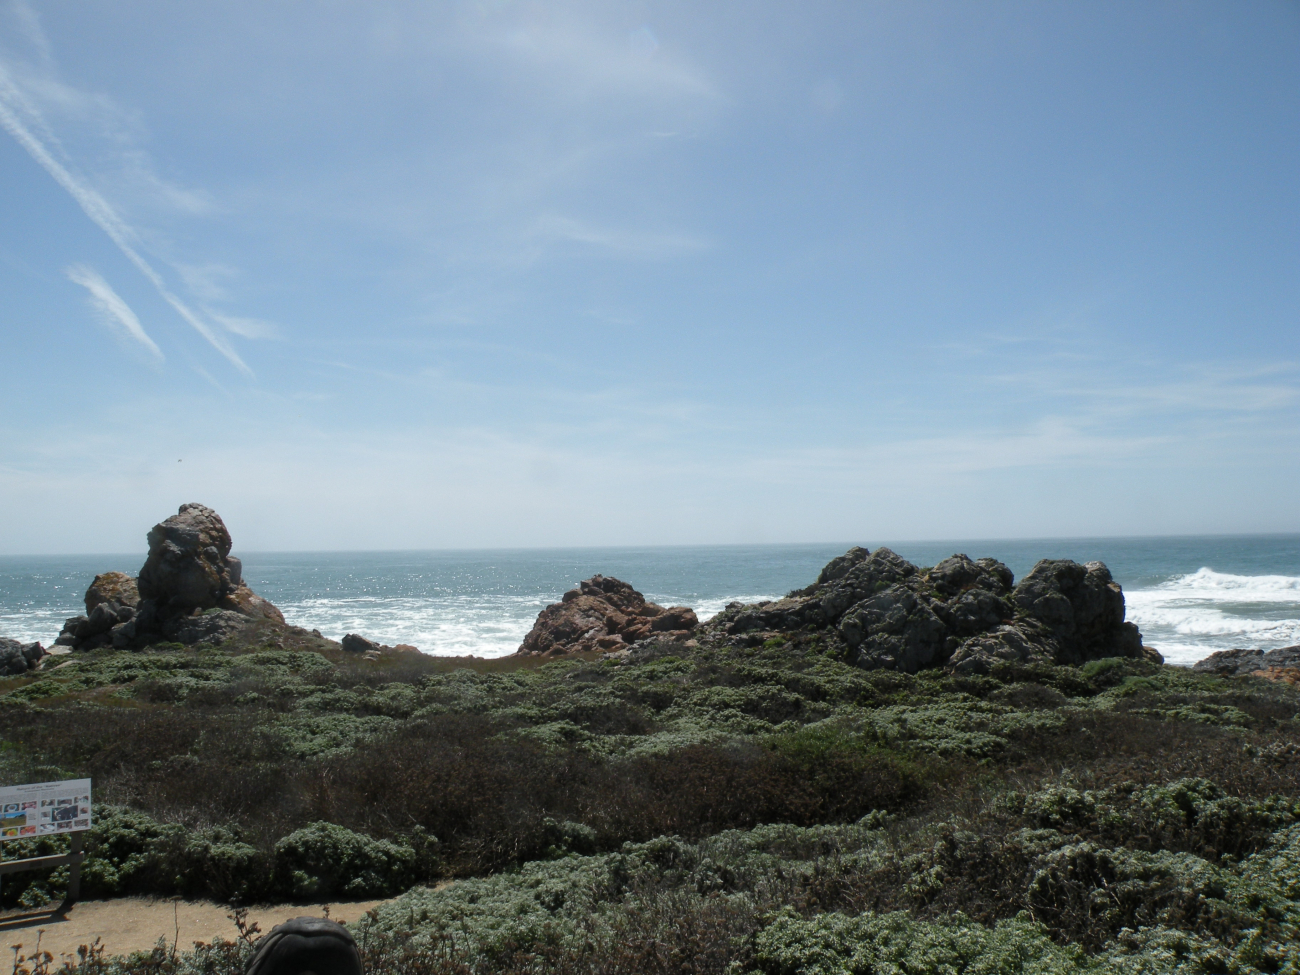 Continuing the orientation of landmarks for helping fellow researchers findwhales in the water, the rocks on land in this view from left to right are ThePinnacle, The Hump, and The Three Sisters